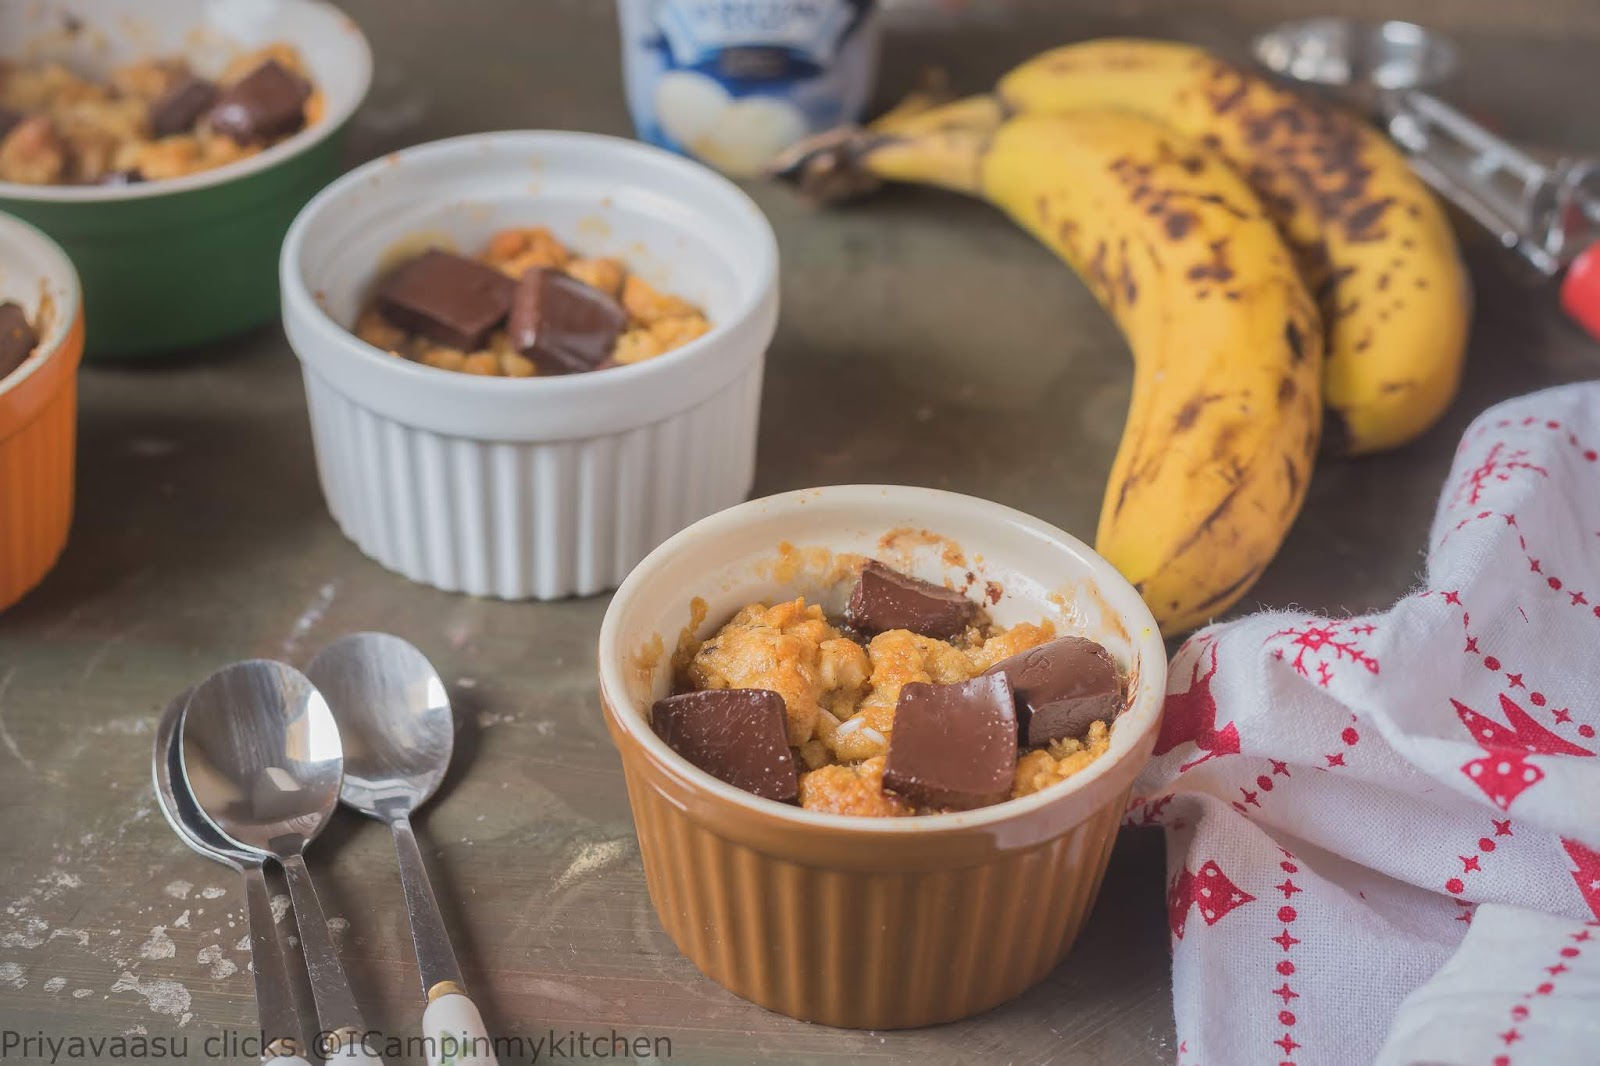 Quick and easy Dessert with Banana